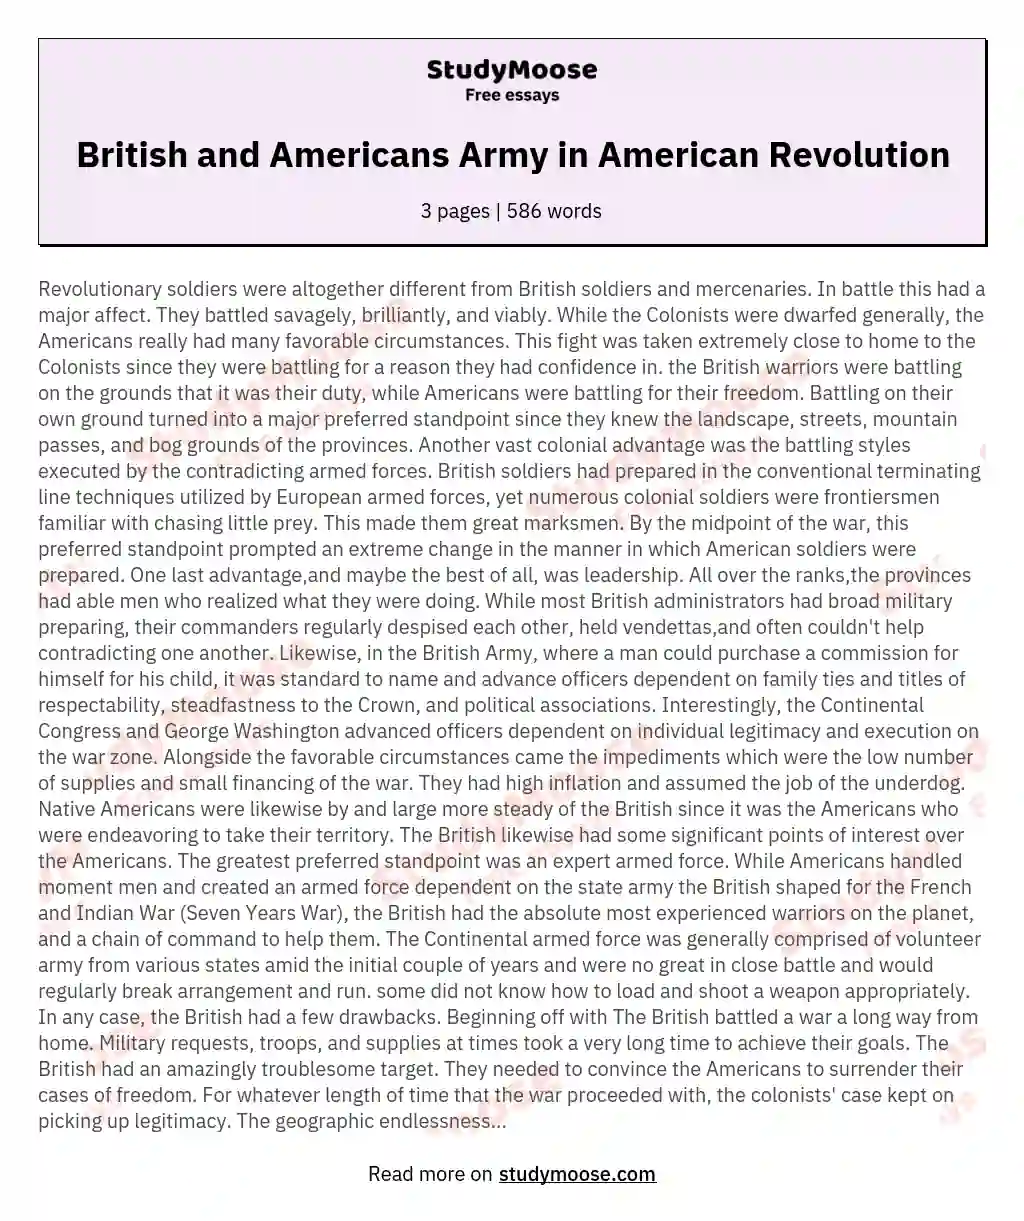 British and Americans Army in American Revolution essay